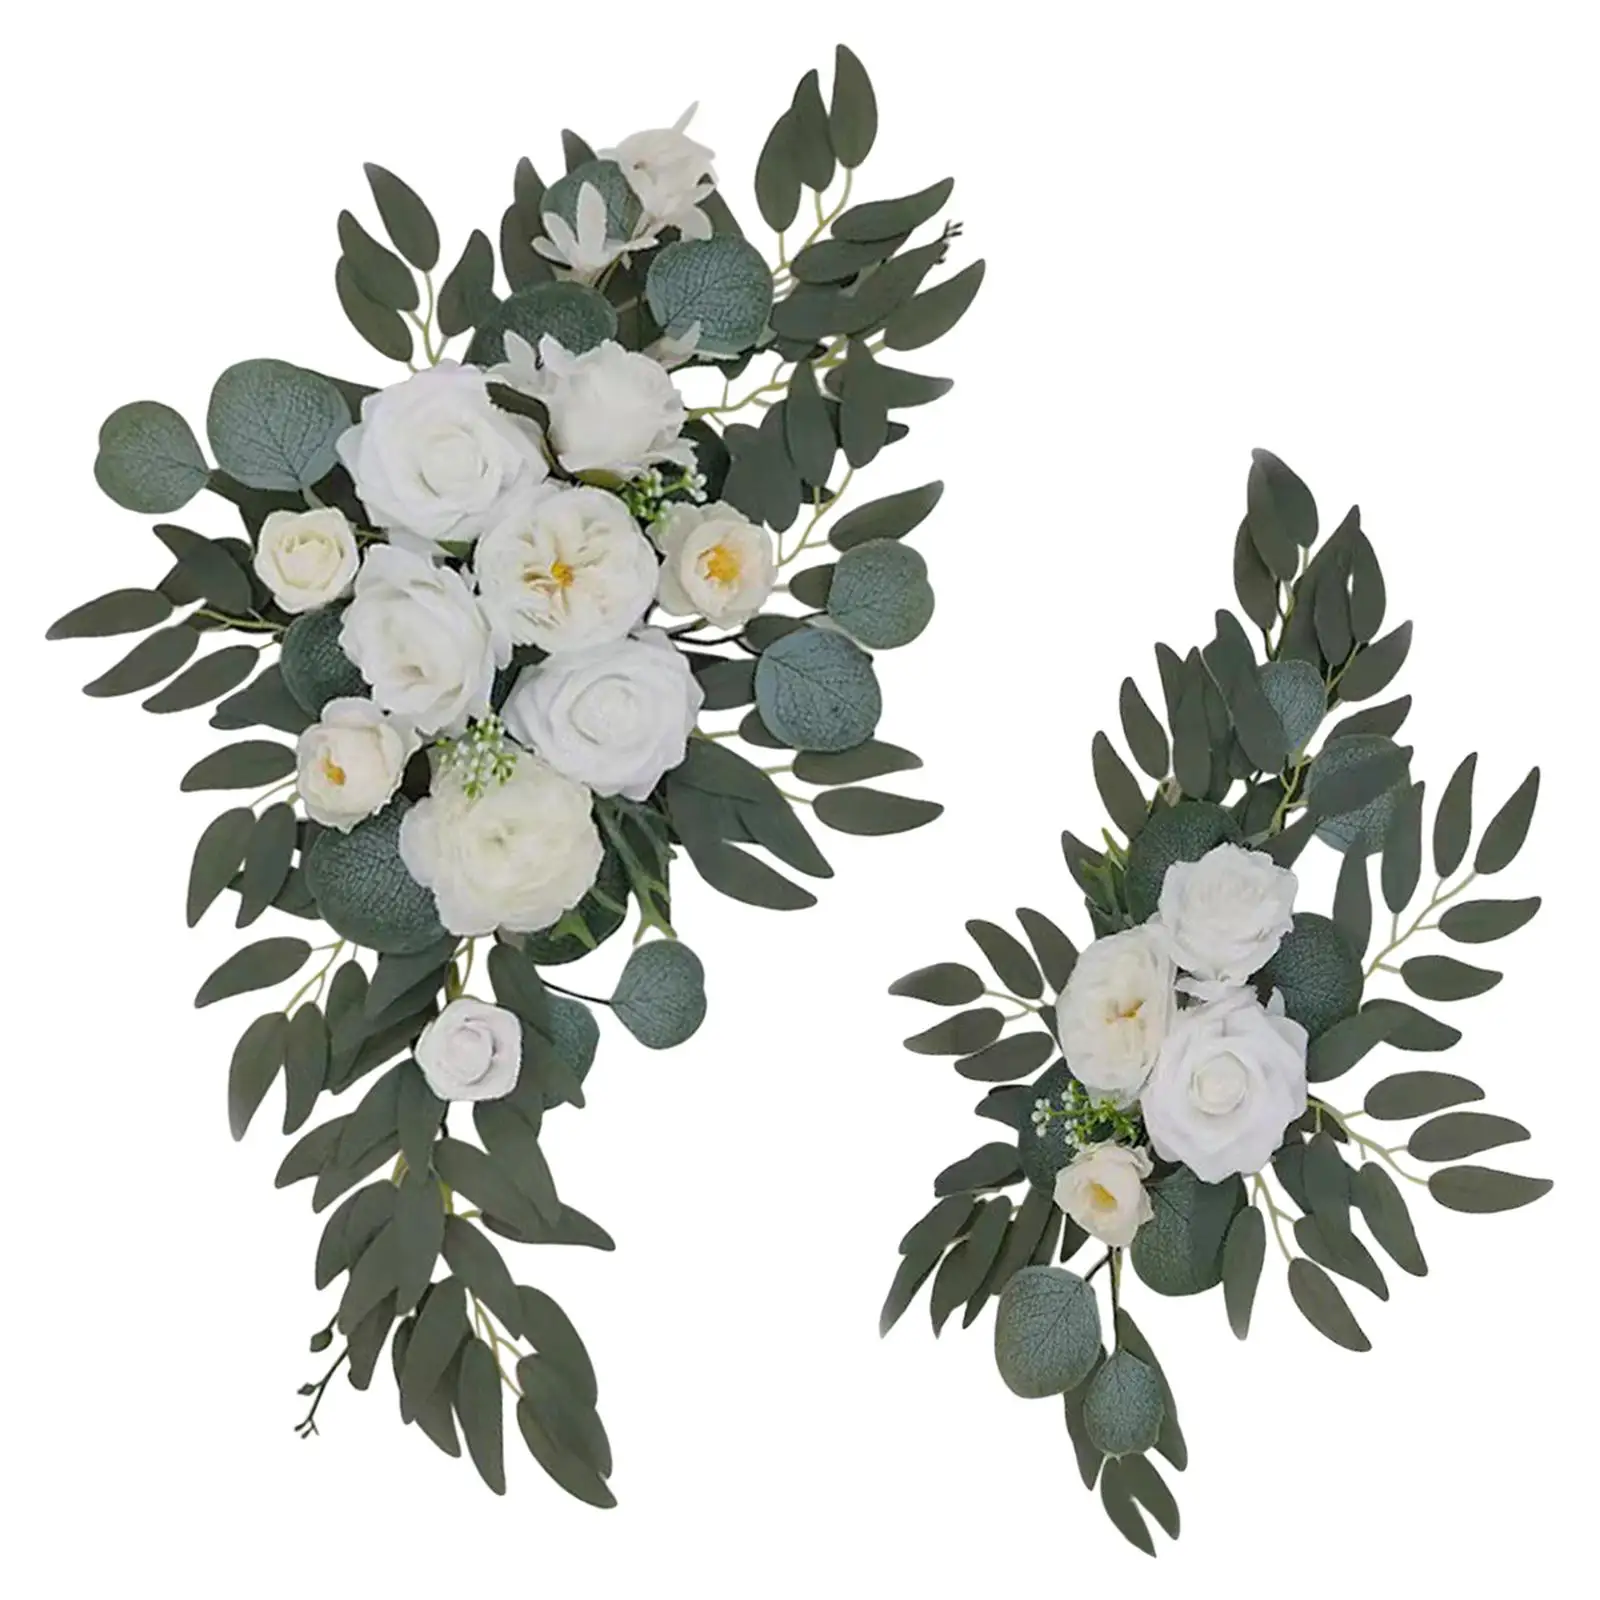 2x Artificial Wedding Arch Flowers White Flowers Green Leaves Ceremony Signs for Backdrop Arrangement Ceremony Wedding Home